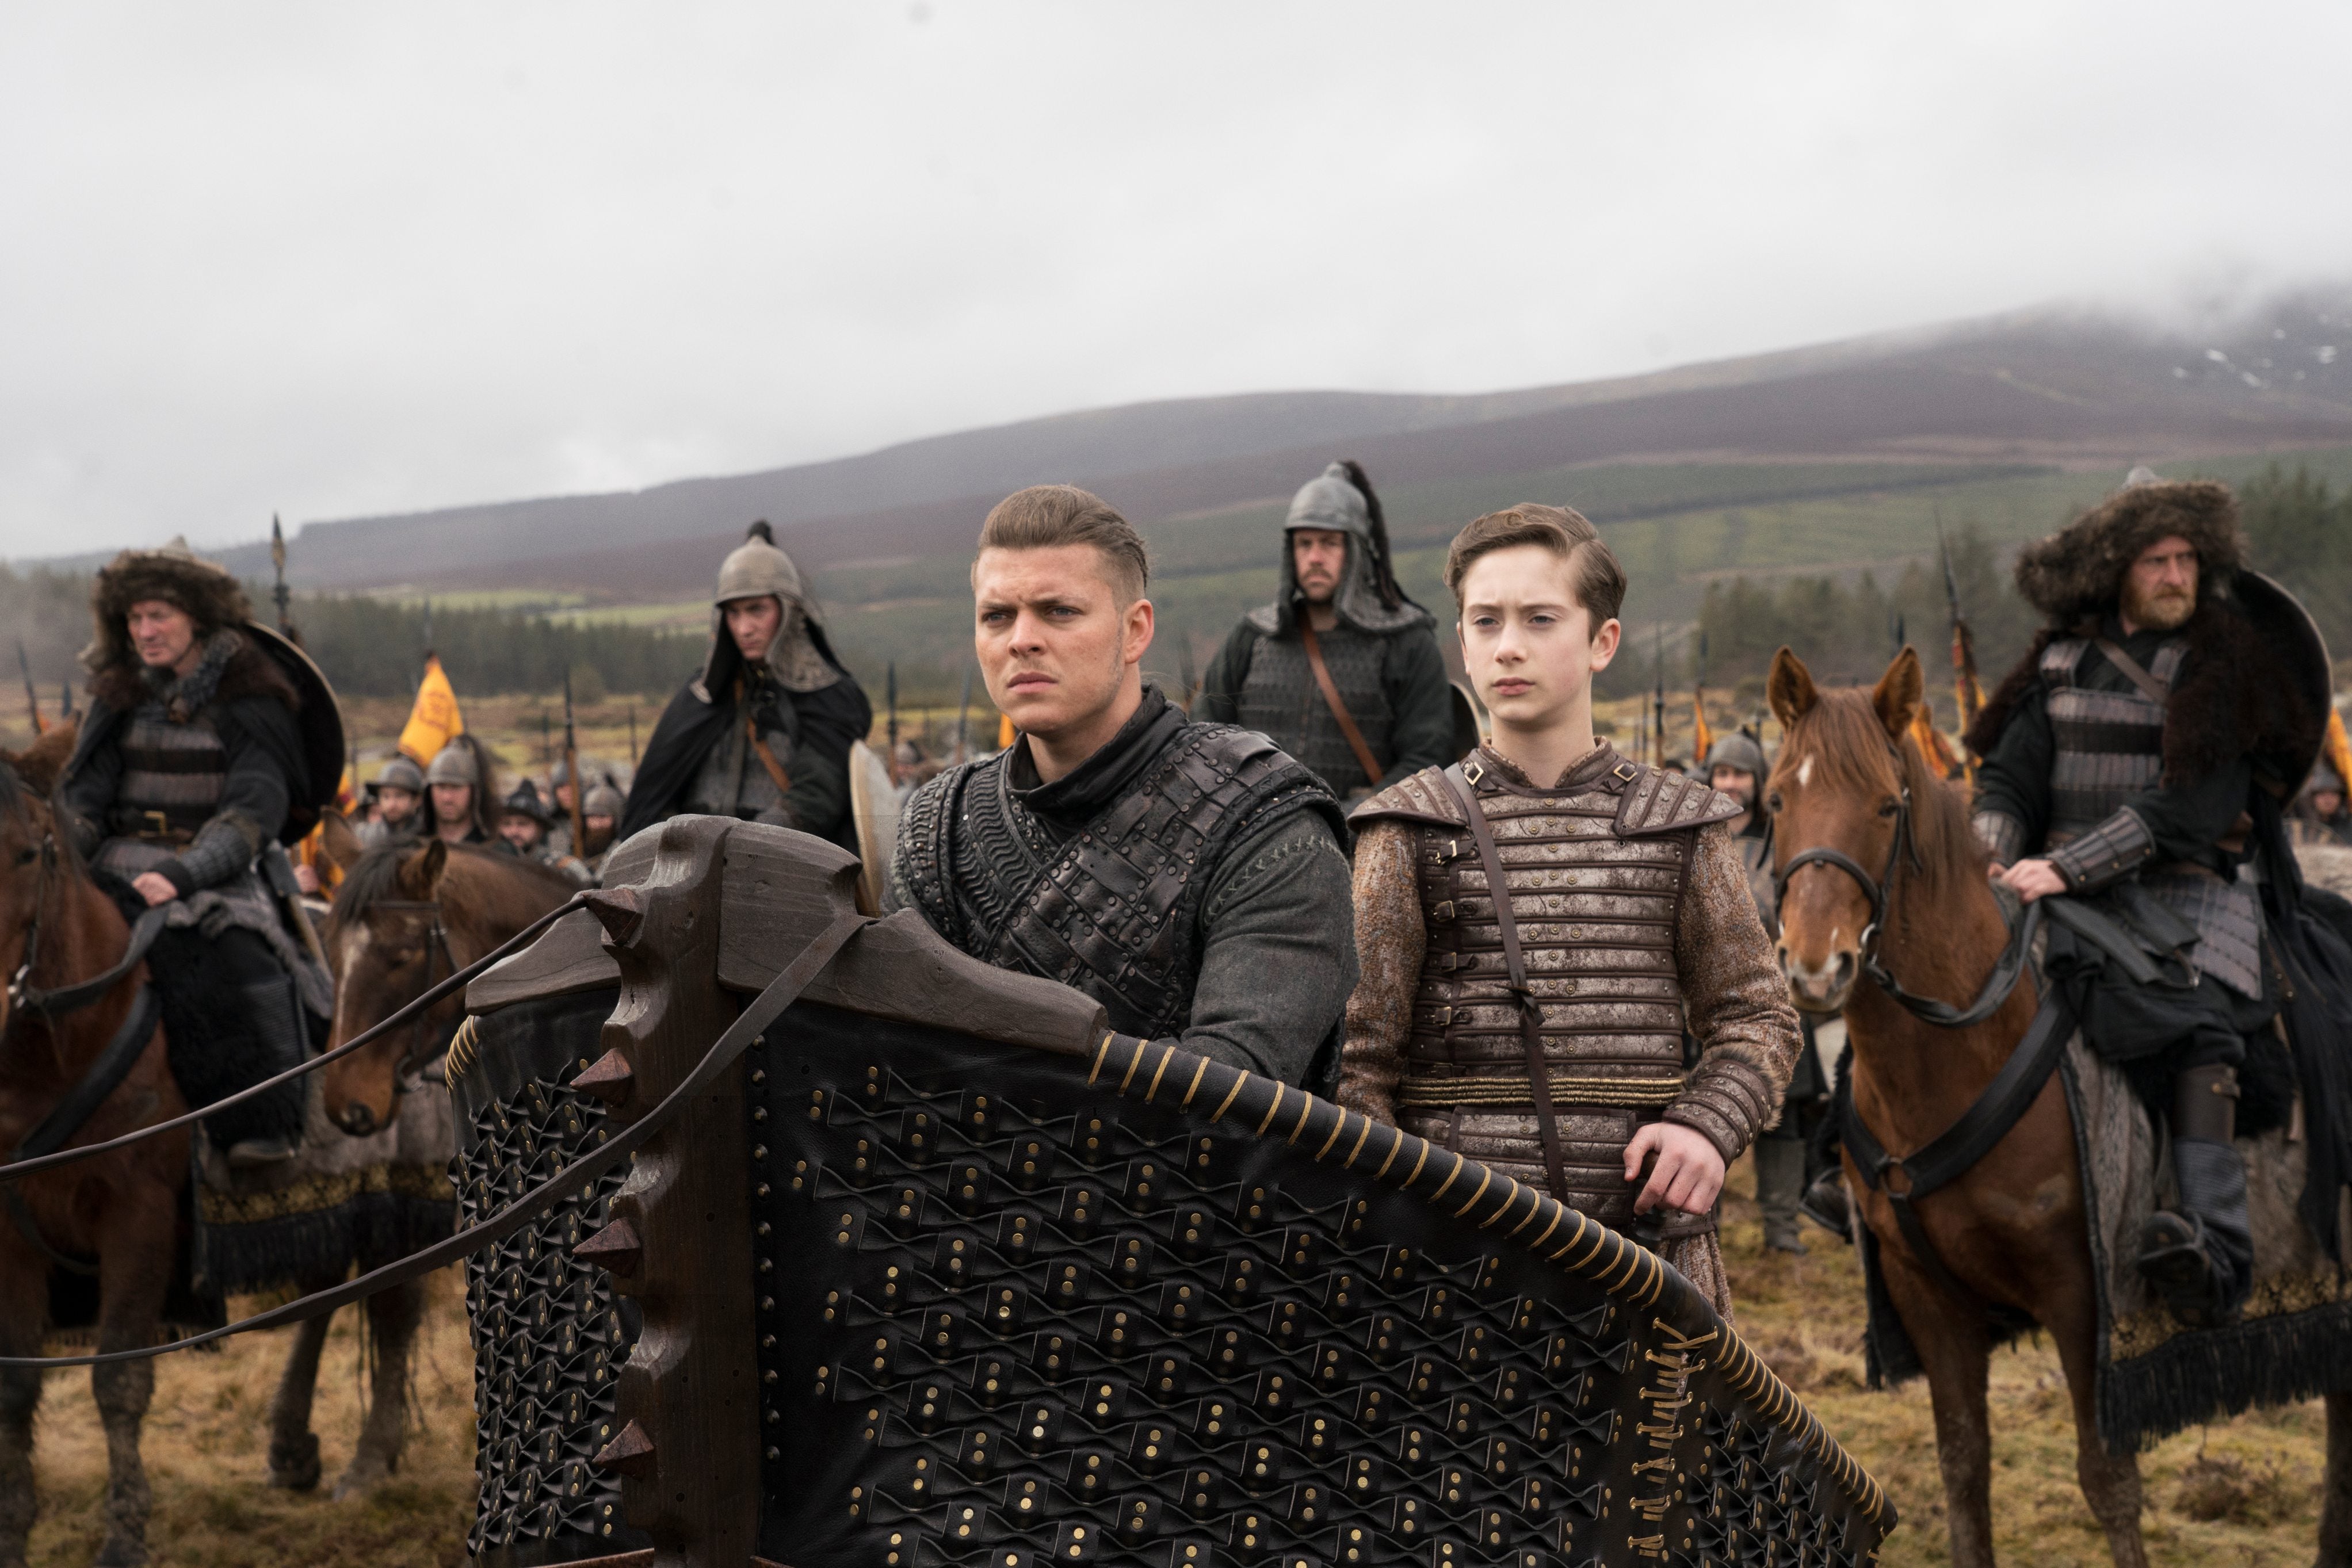 VIKINGS IMAGINES - Imagine going back in time and meeting Ivar